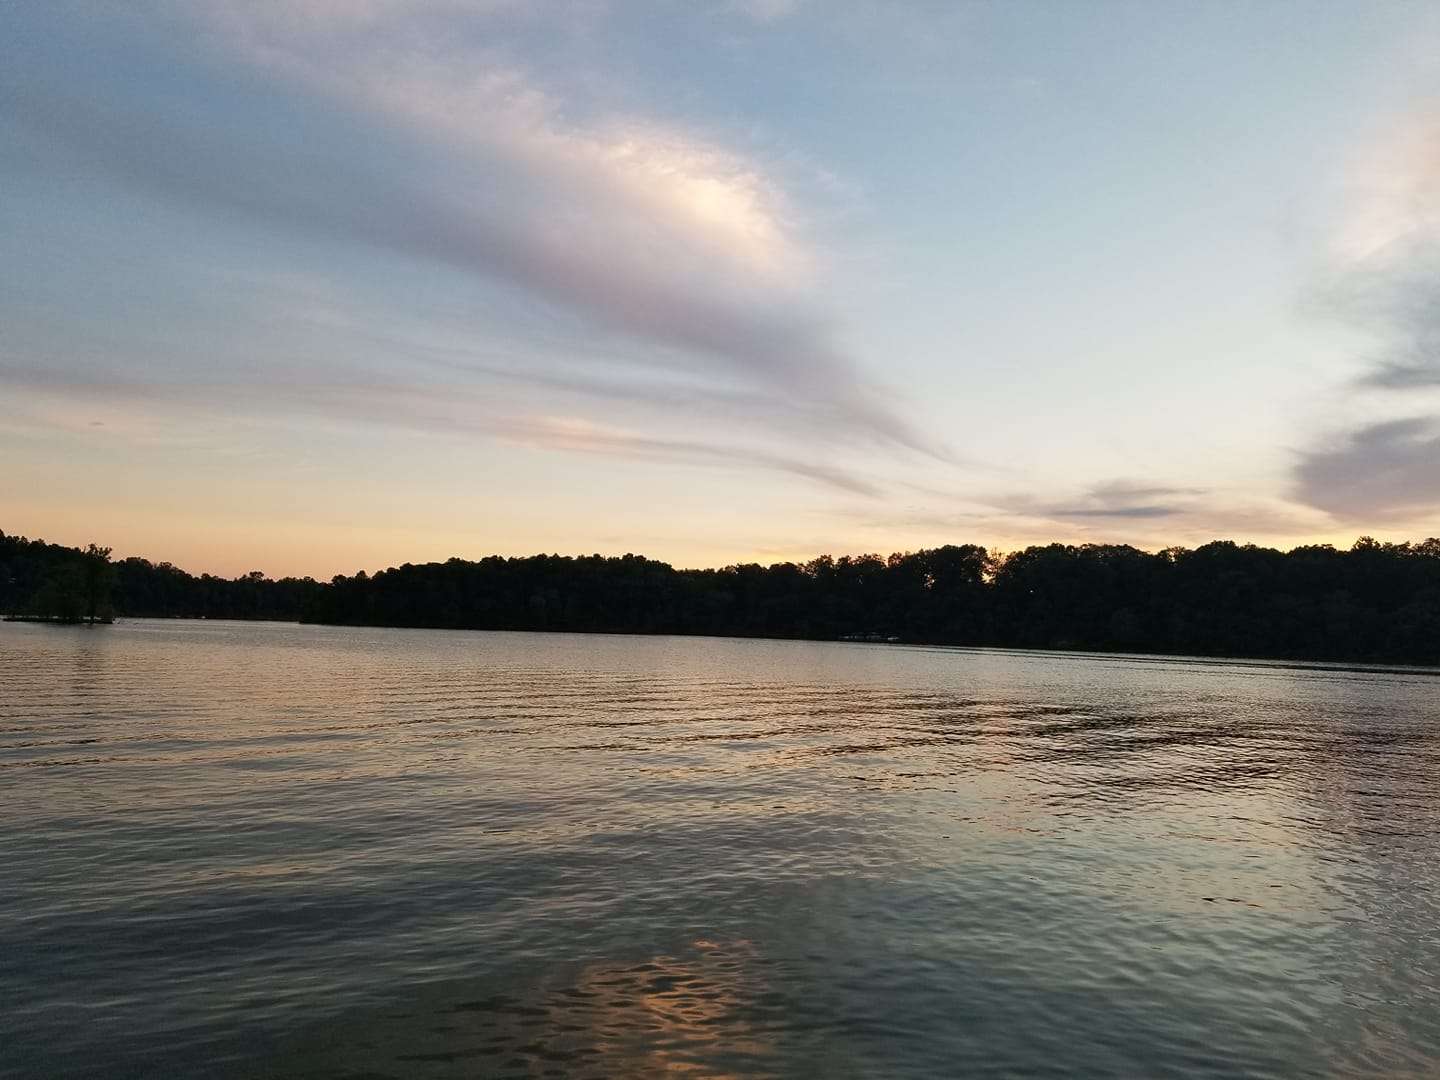 Jason Skaggs, Facebook<BR>
Nolin River Lake<BR>
Nolin River Lake, KY is my Favorite because its about 25 minutes from the house and I grew up fishing it with my late uncle! Very good memories!
